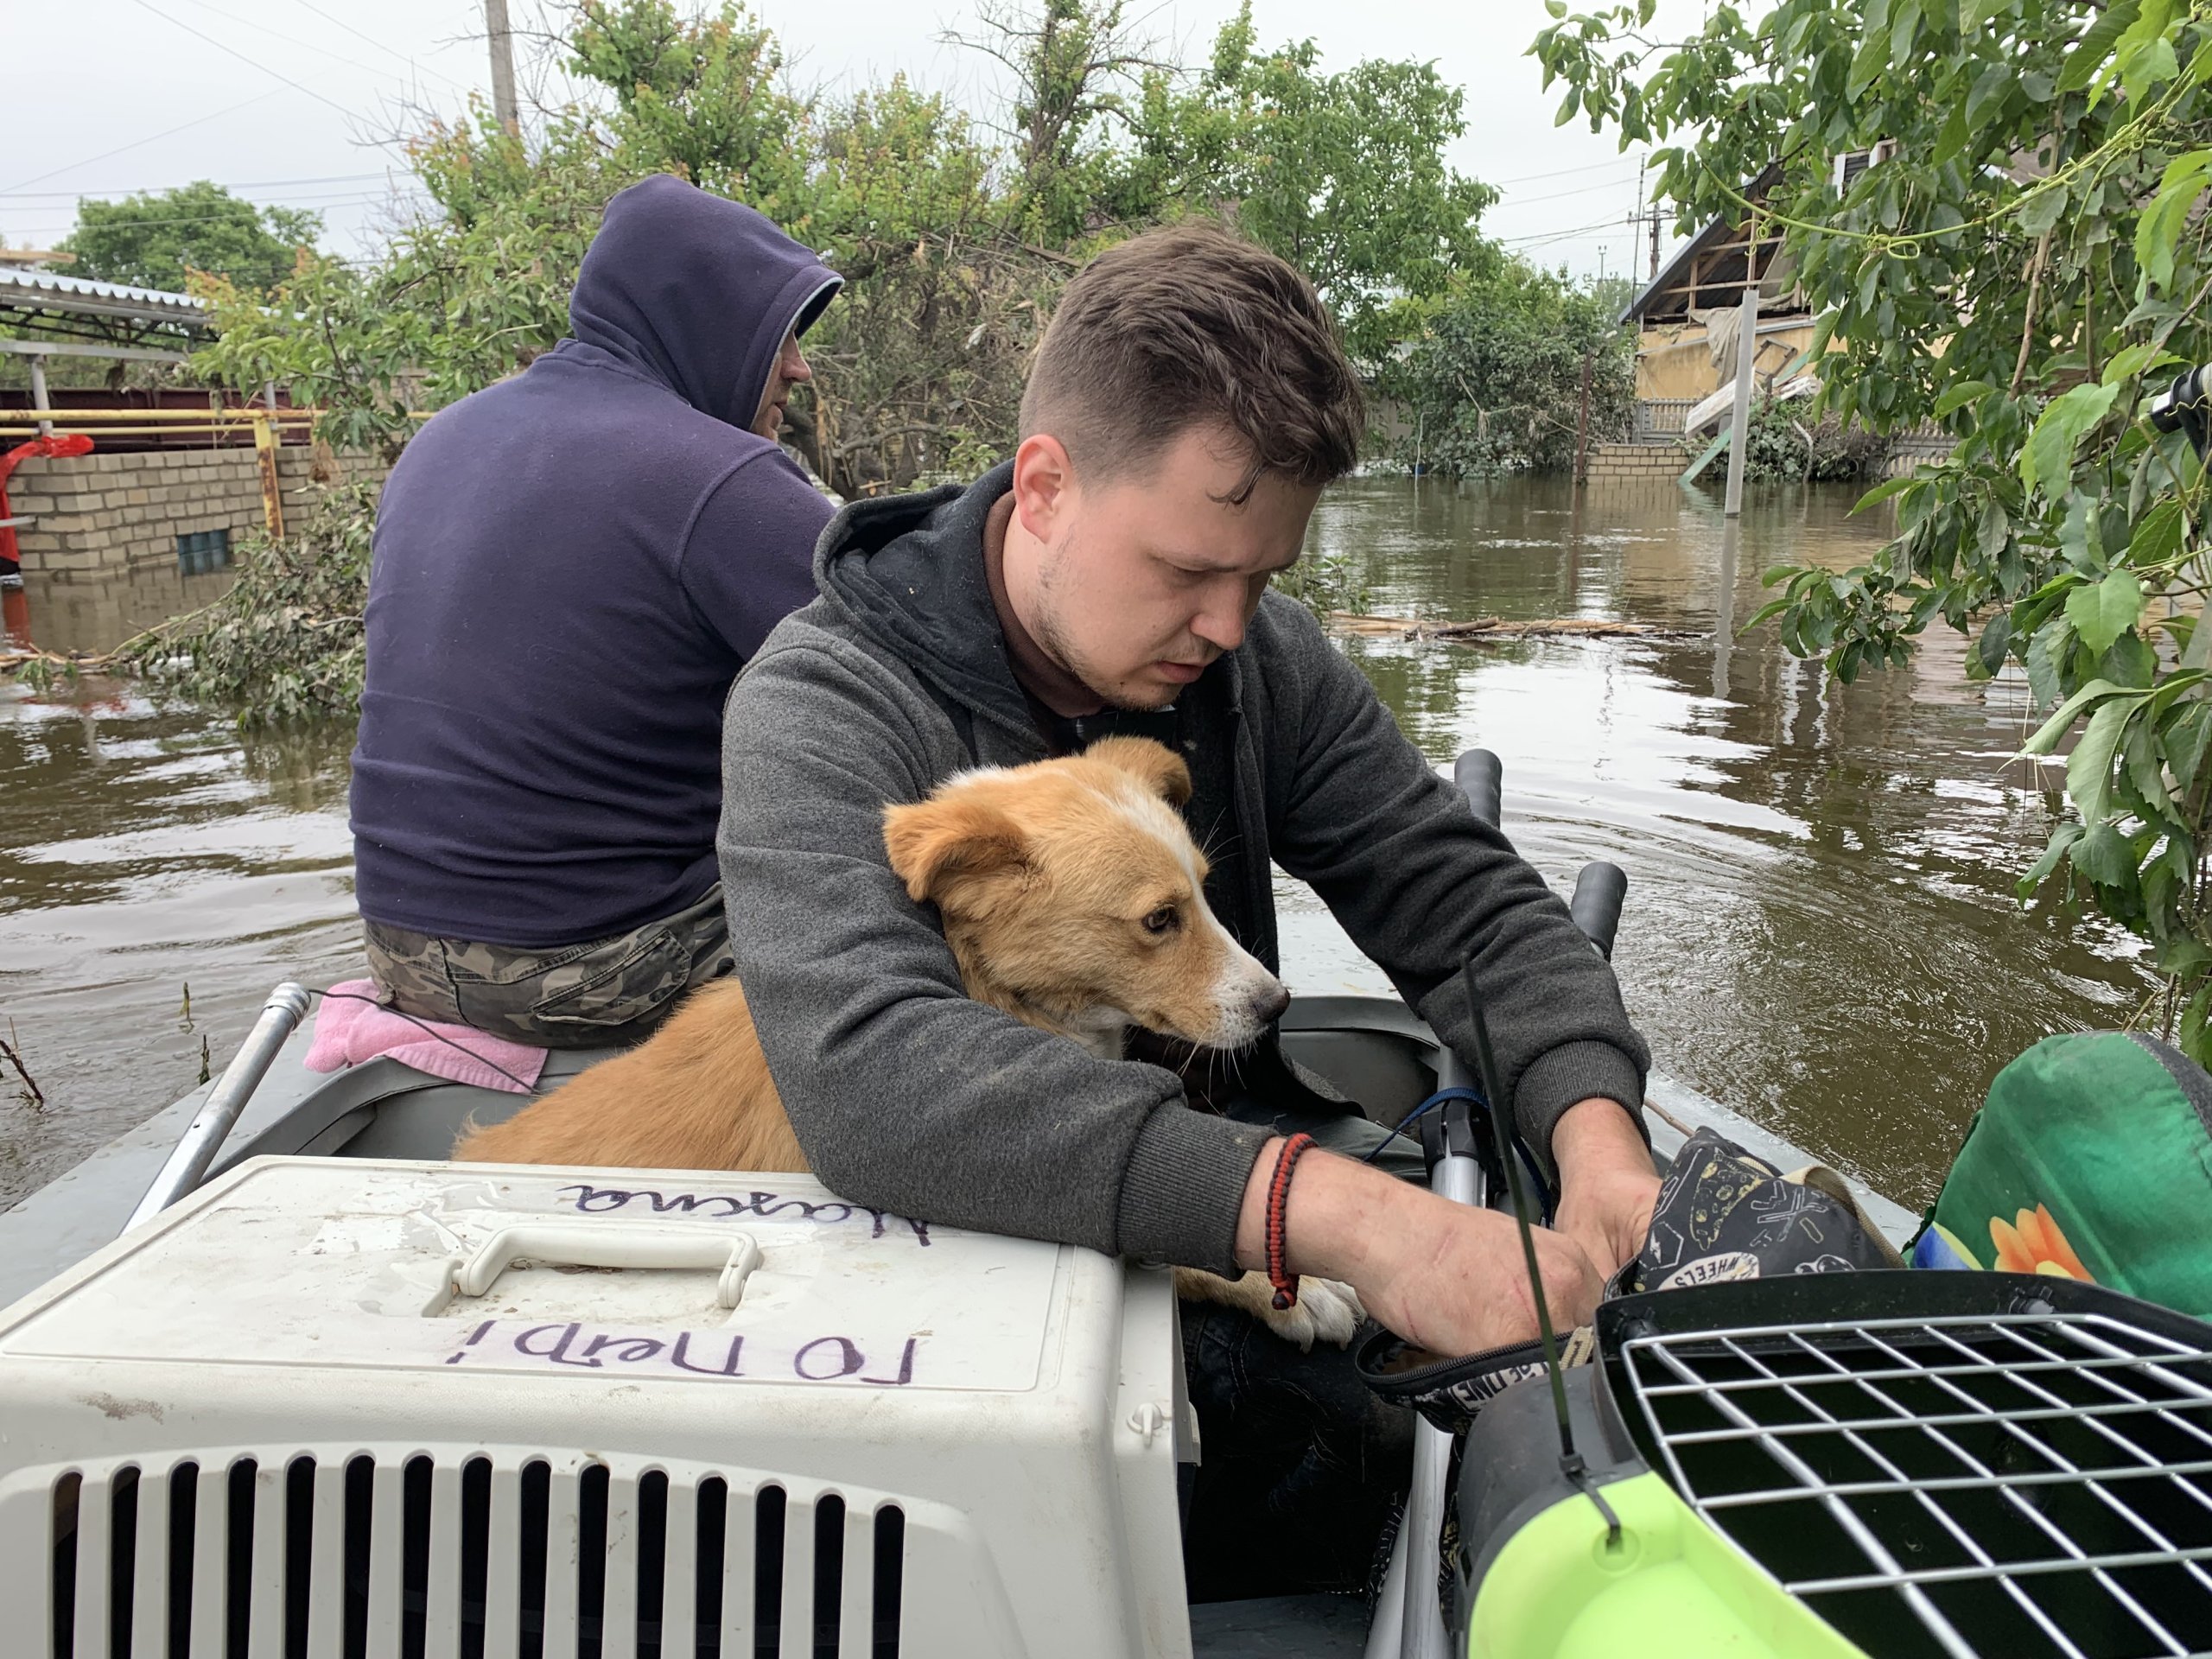 ukraine rescue team with dog in flood waters